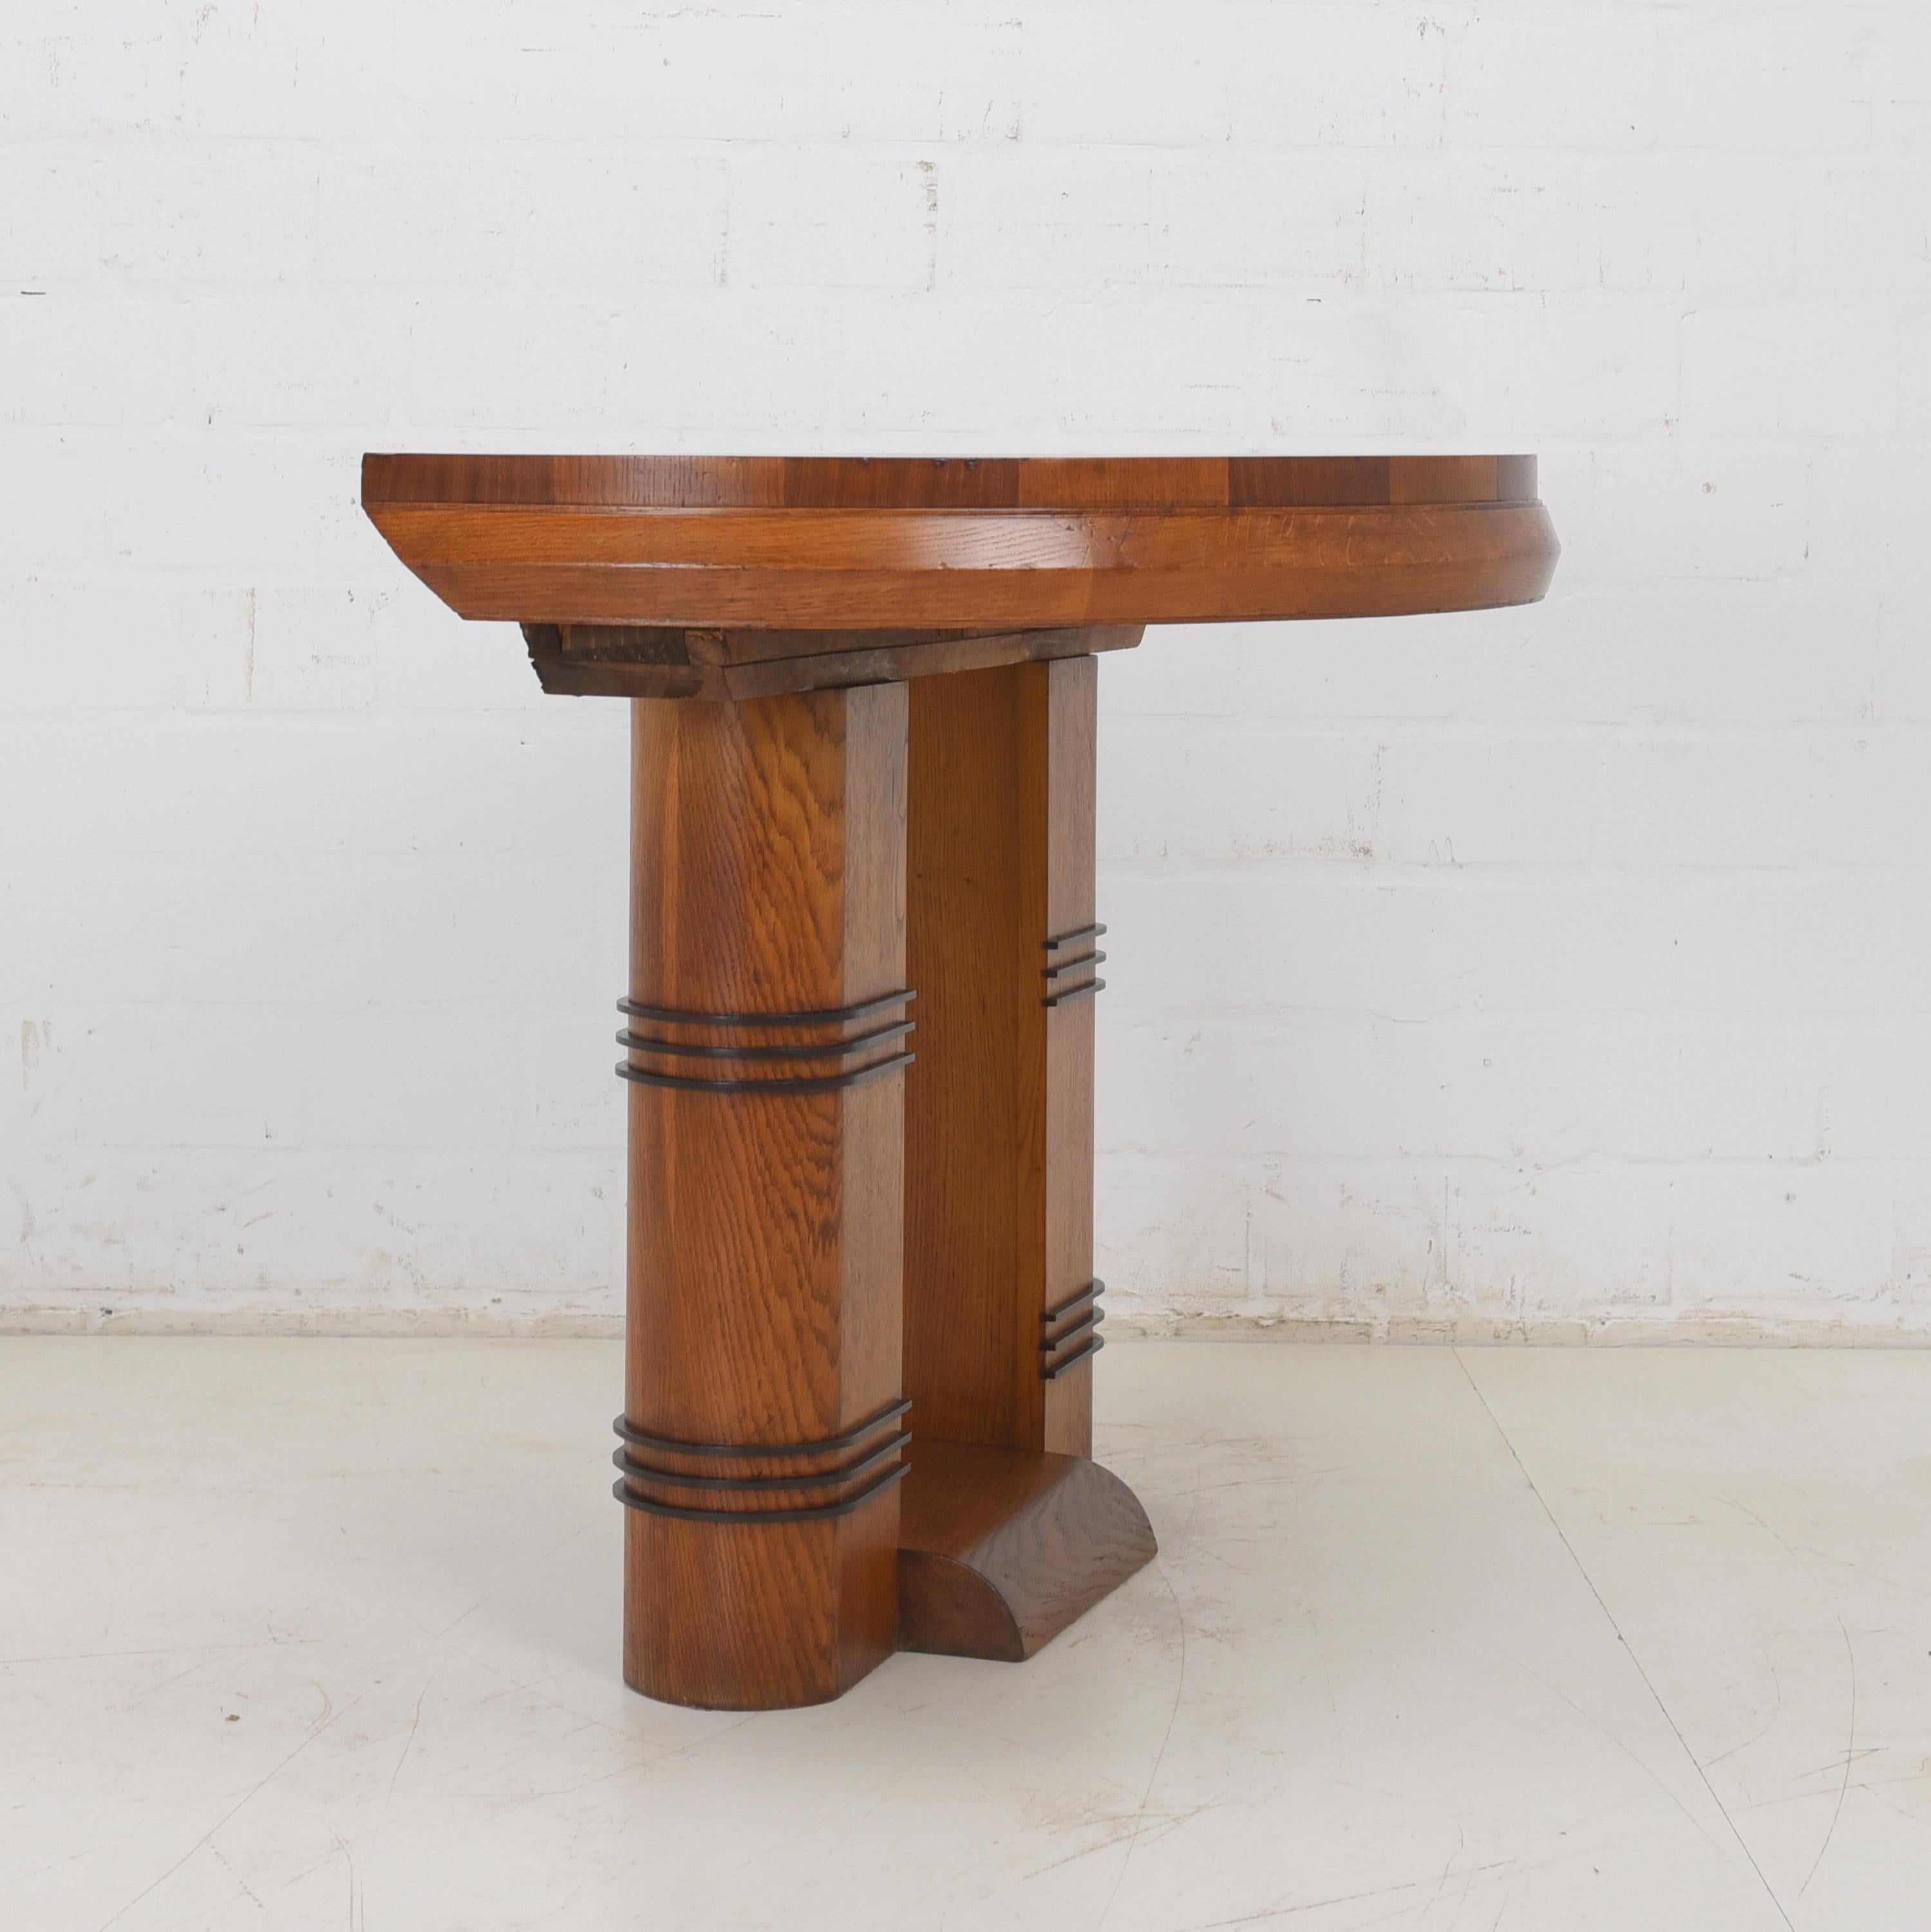 Art Deco Console Table / Wall Table in Oak Mahogany 1/2, 1930 For Sale 8